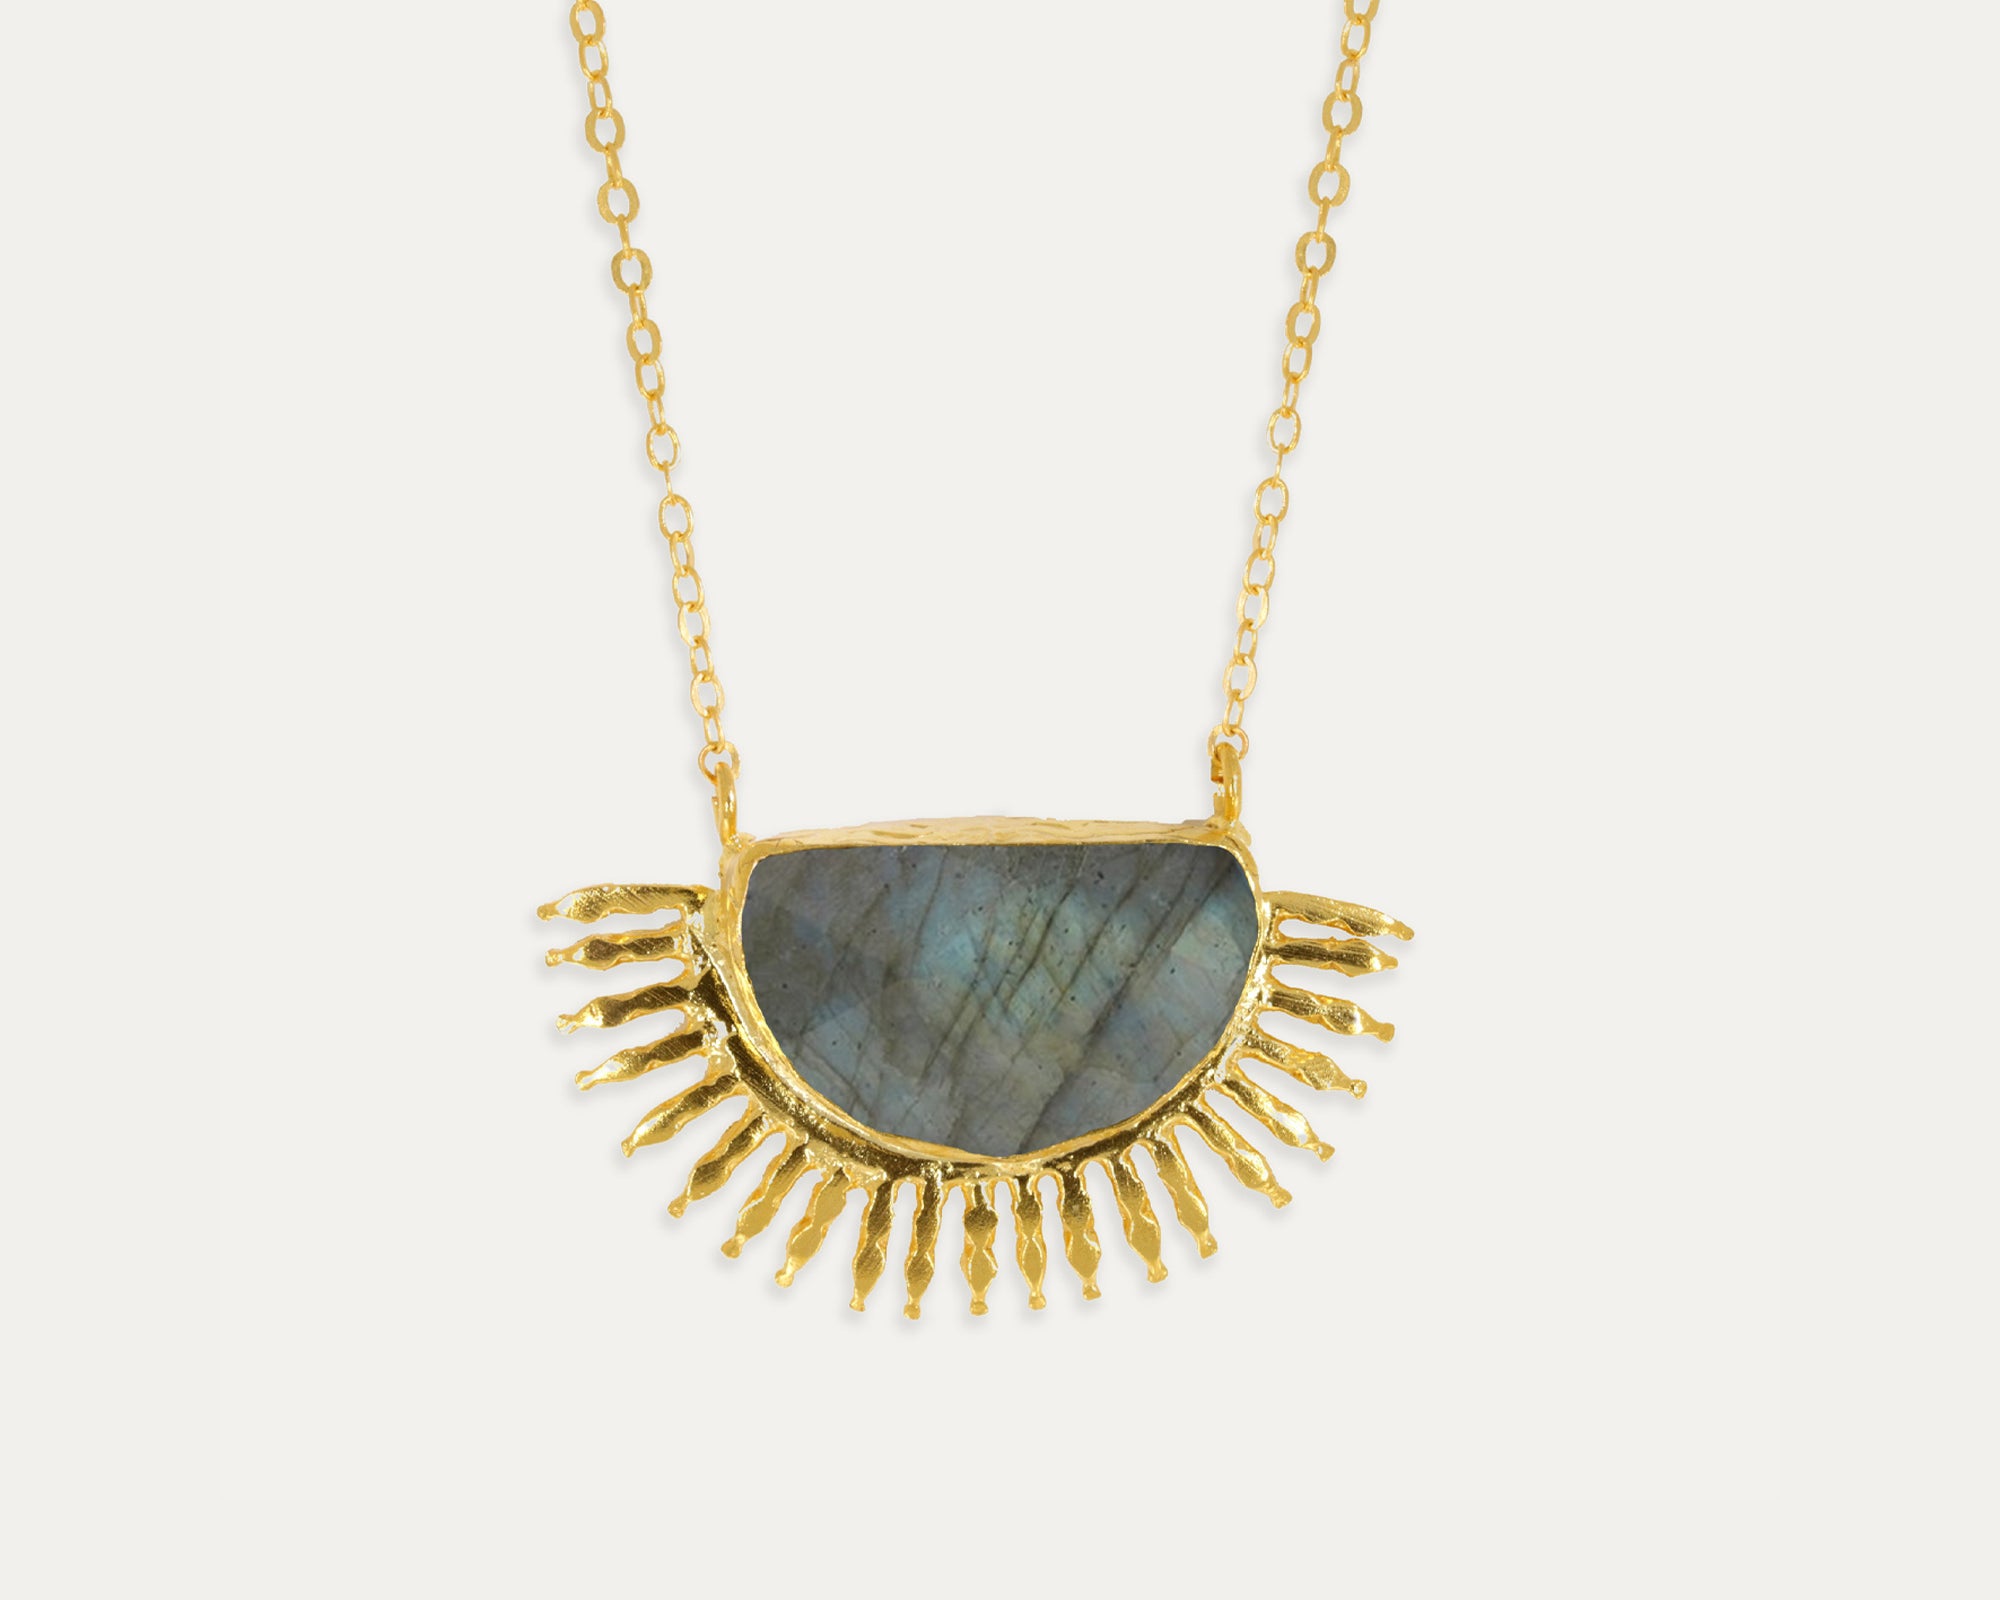 Sunrise Labradorite Pendant Necklace | Sustainable Jewellery by Ottoman Hands